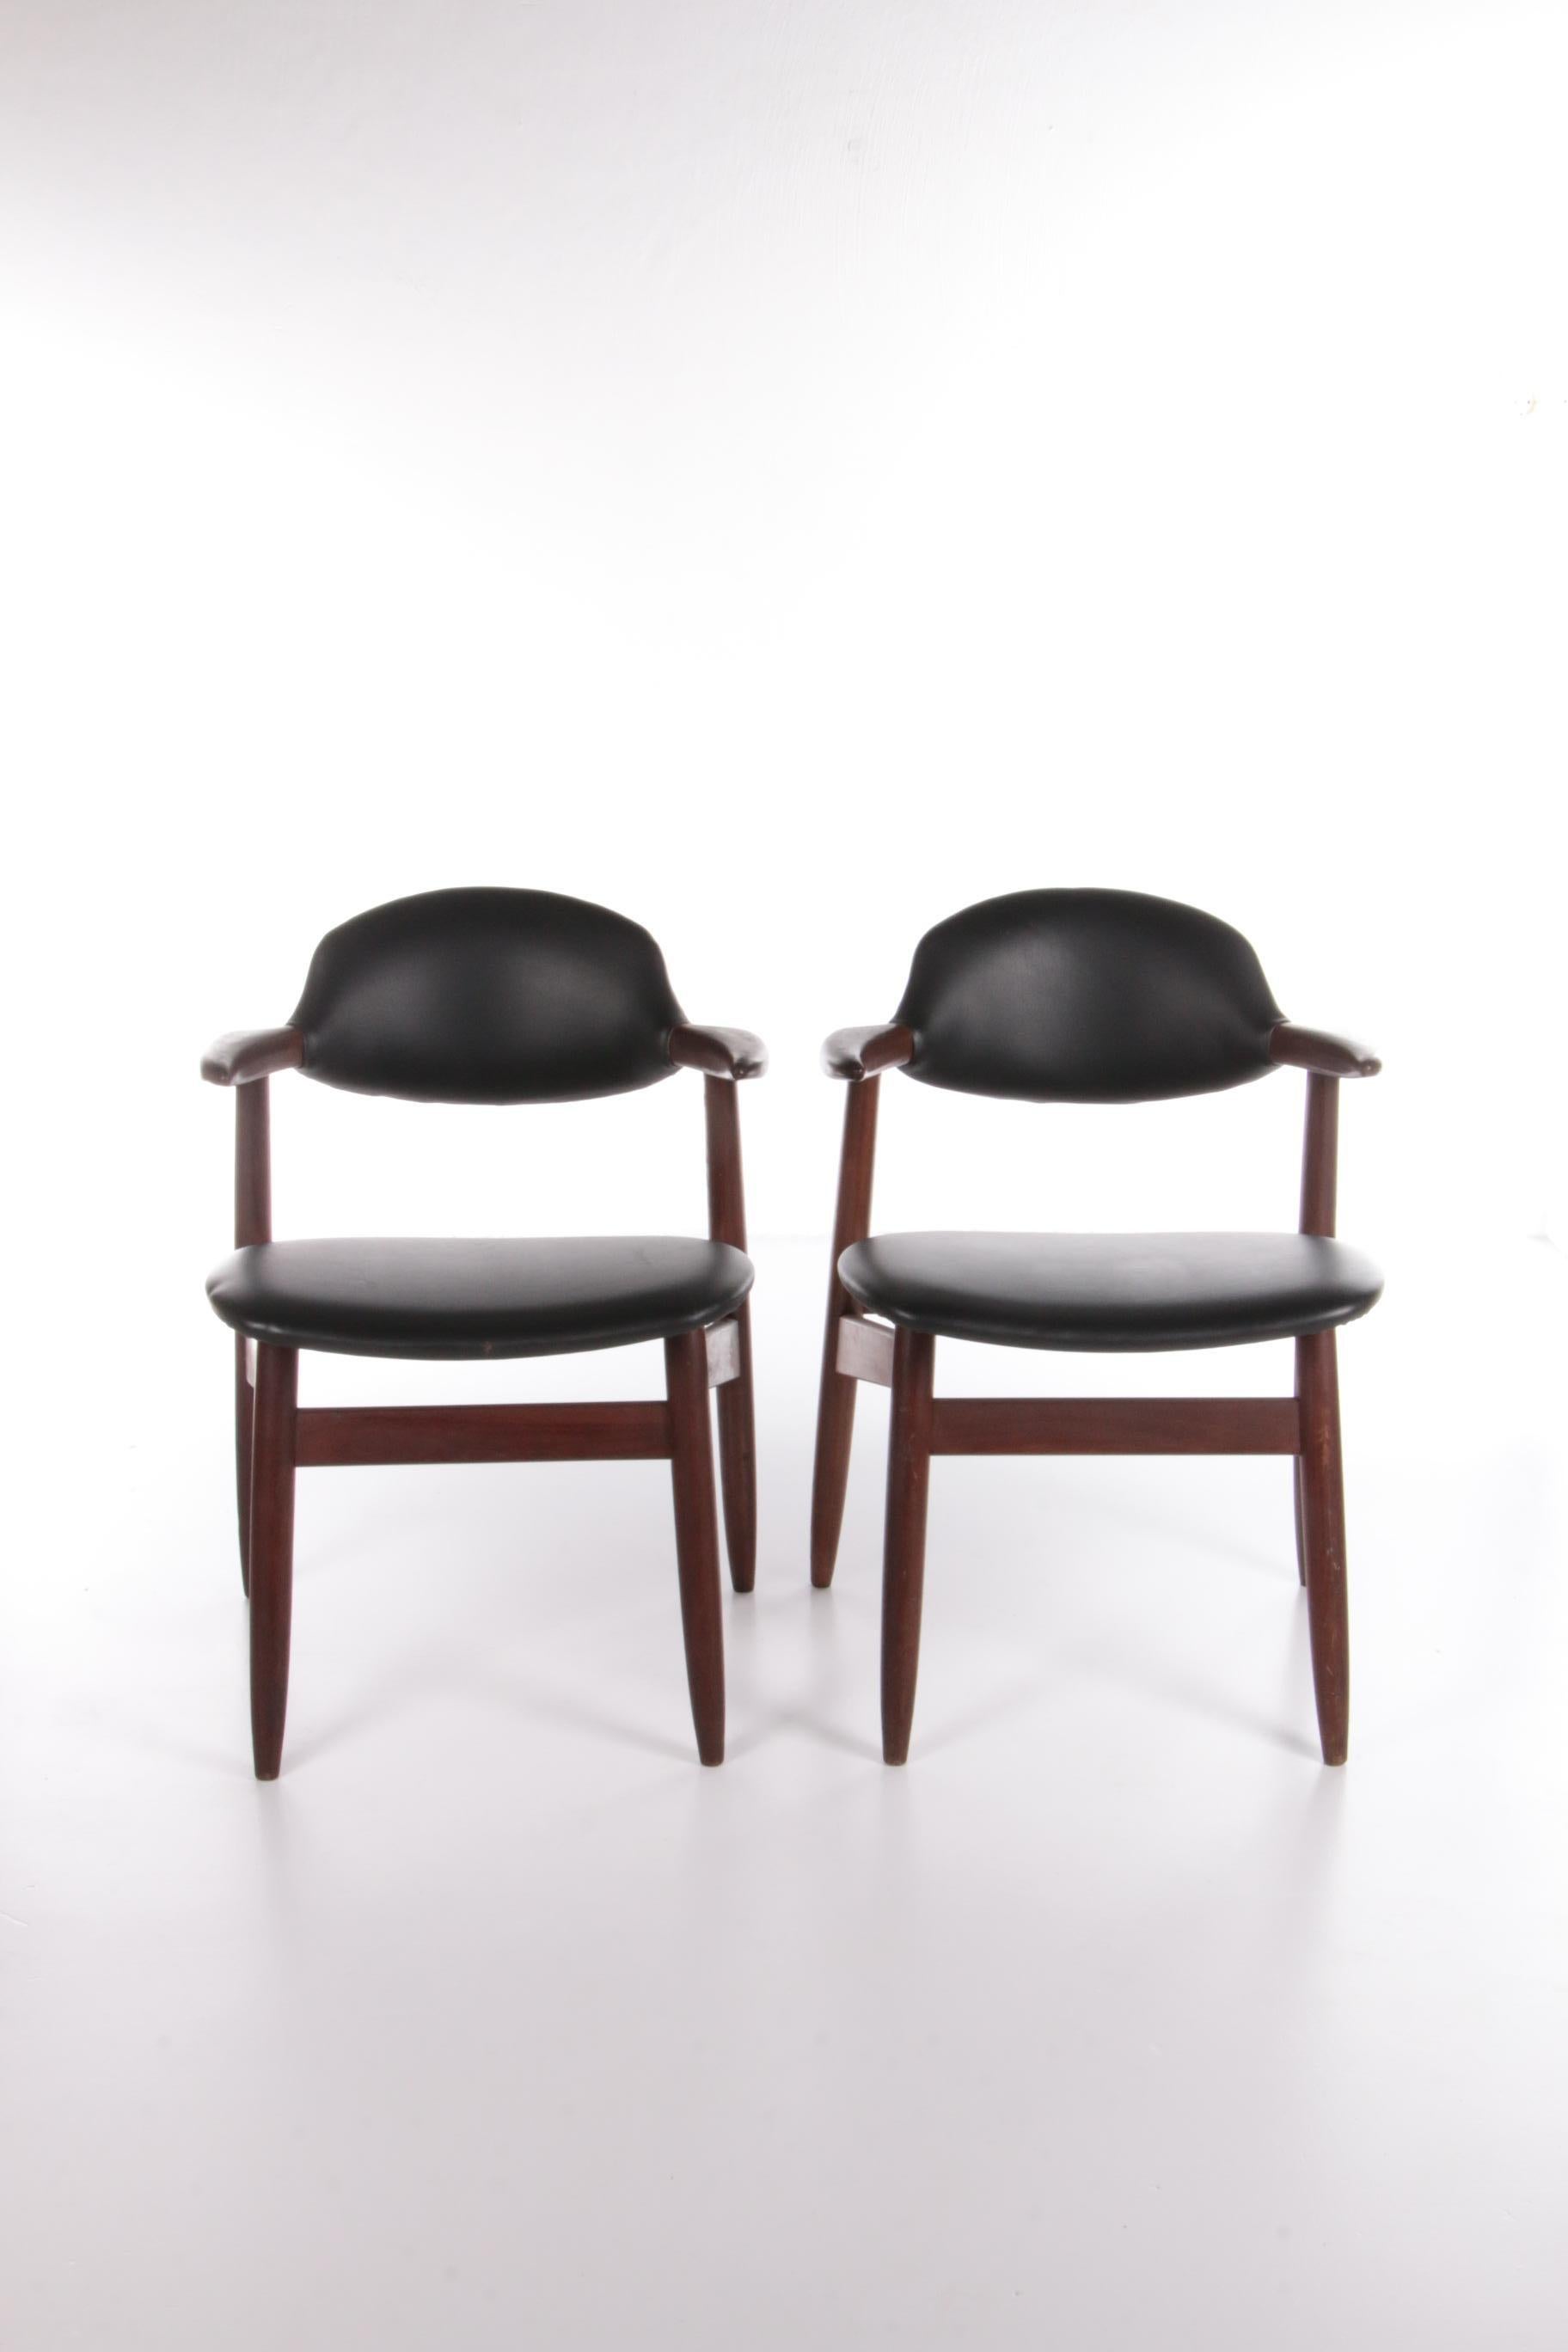 A beautiful set of two classic Dutch Cowhorn chairs by Hulmefa.

These stylish chairs were made by the Dutch designer Tijsseling in the 1960s. The simple and sleek chairs are a beautiful example of Dutch Design.

The chairs are made of a solid